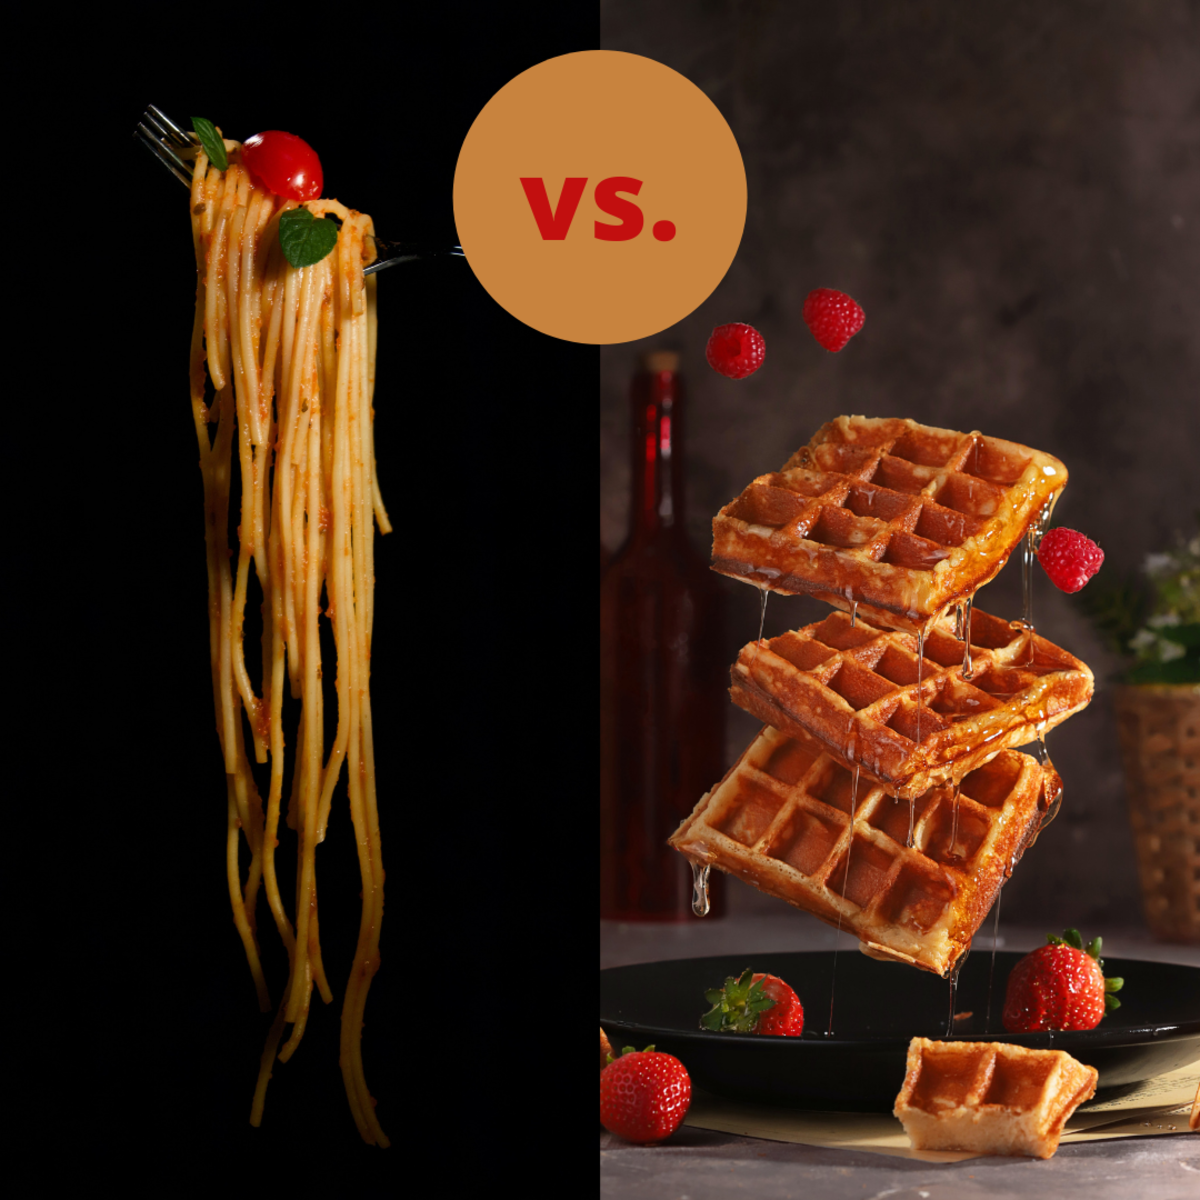 Spaghetti vs. Waffles: Gender Differences in Cognitive Problem-Solving